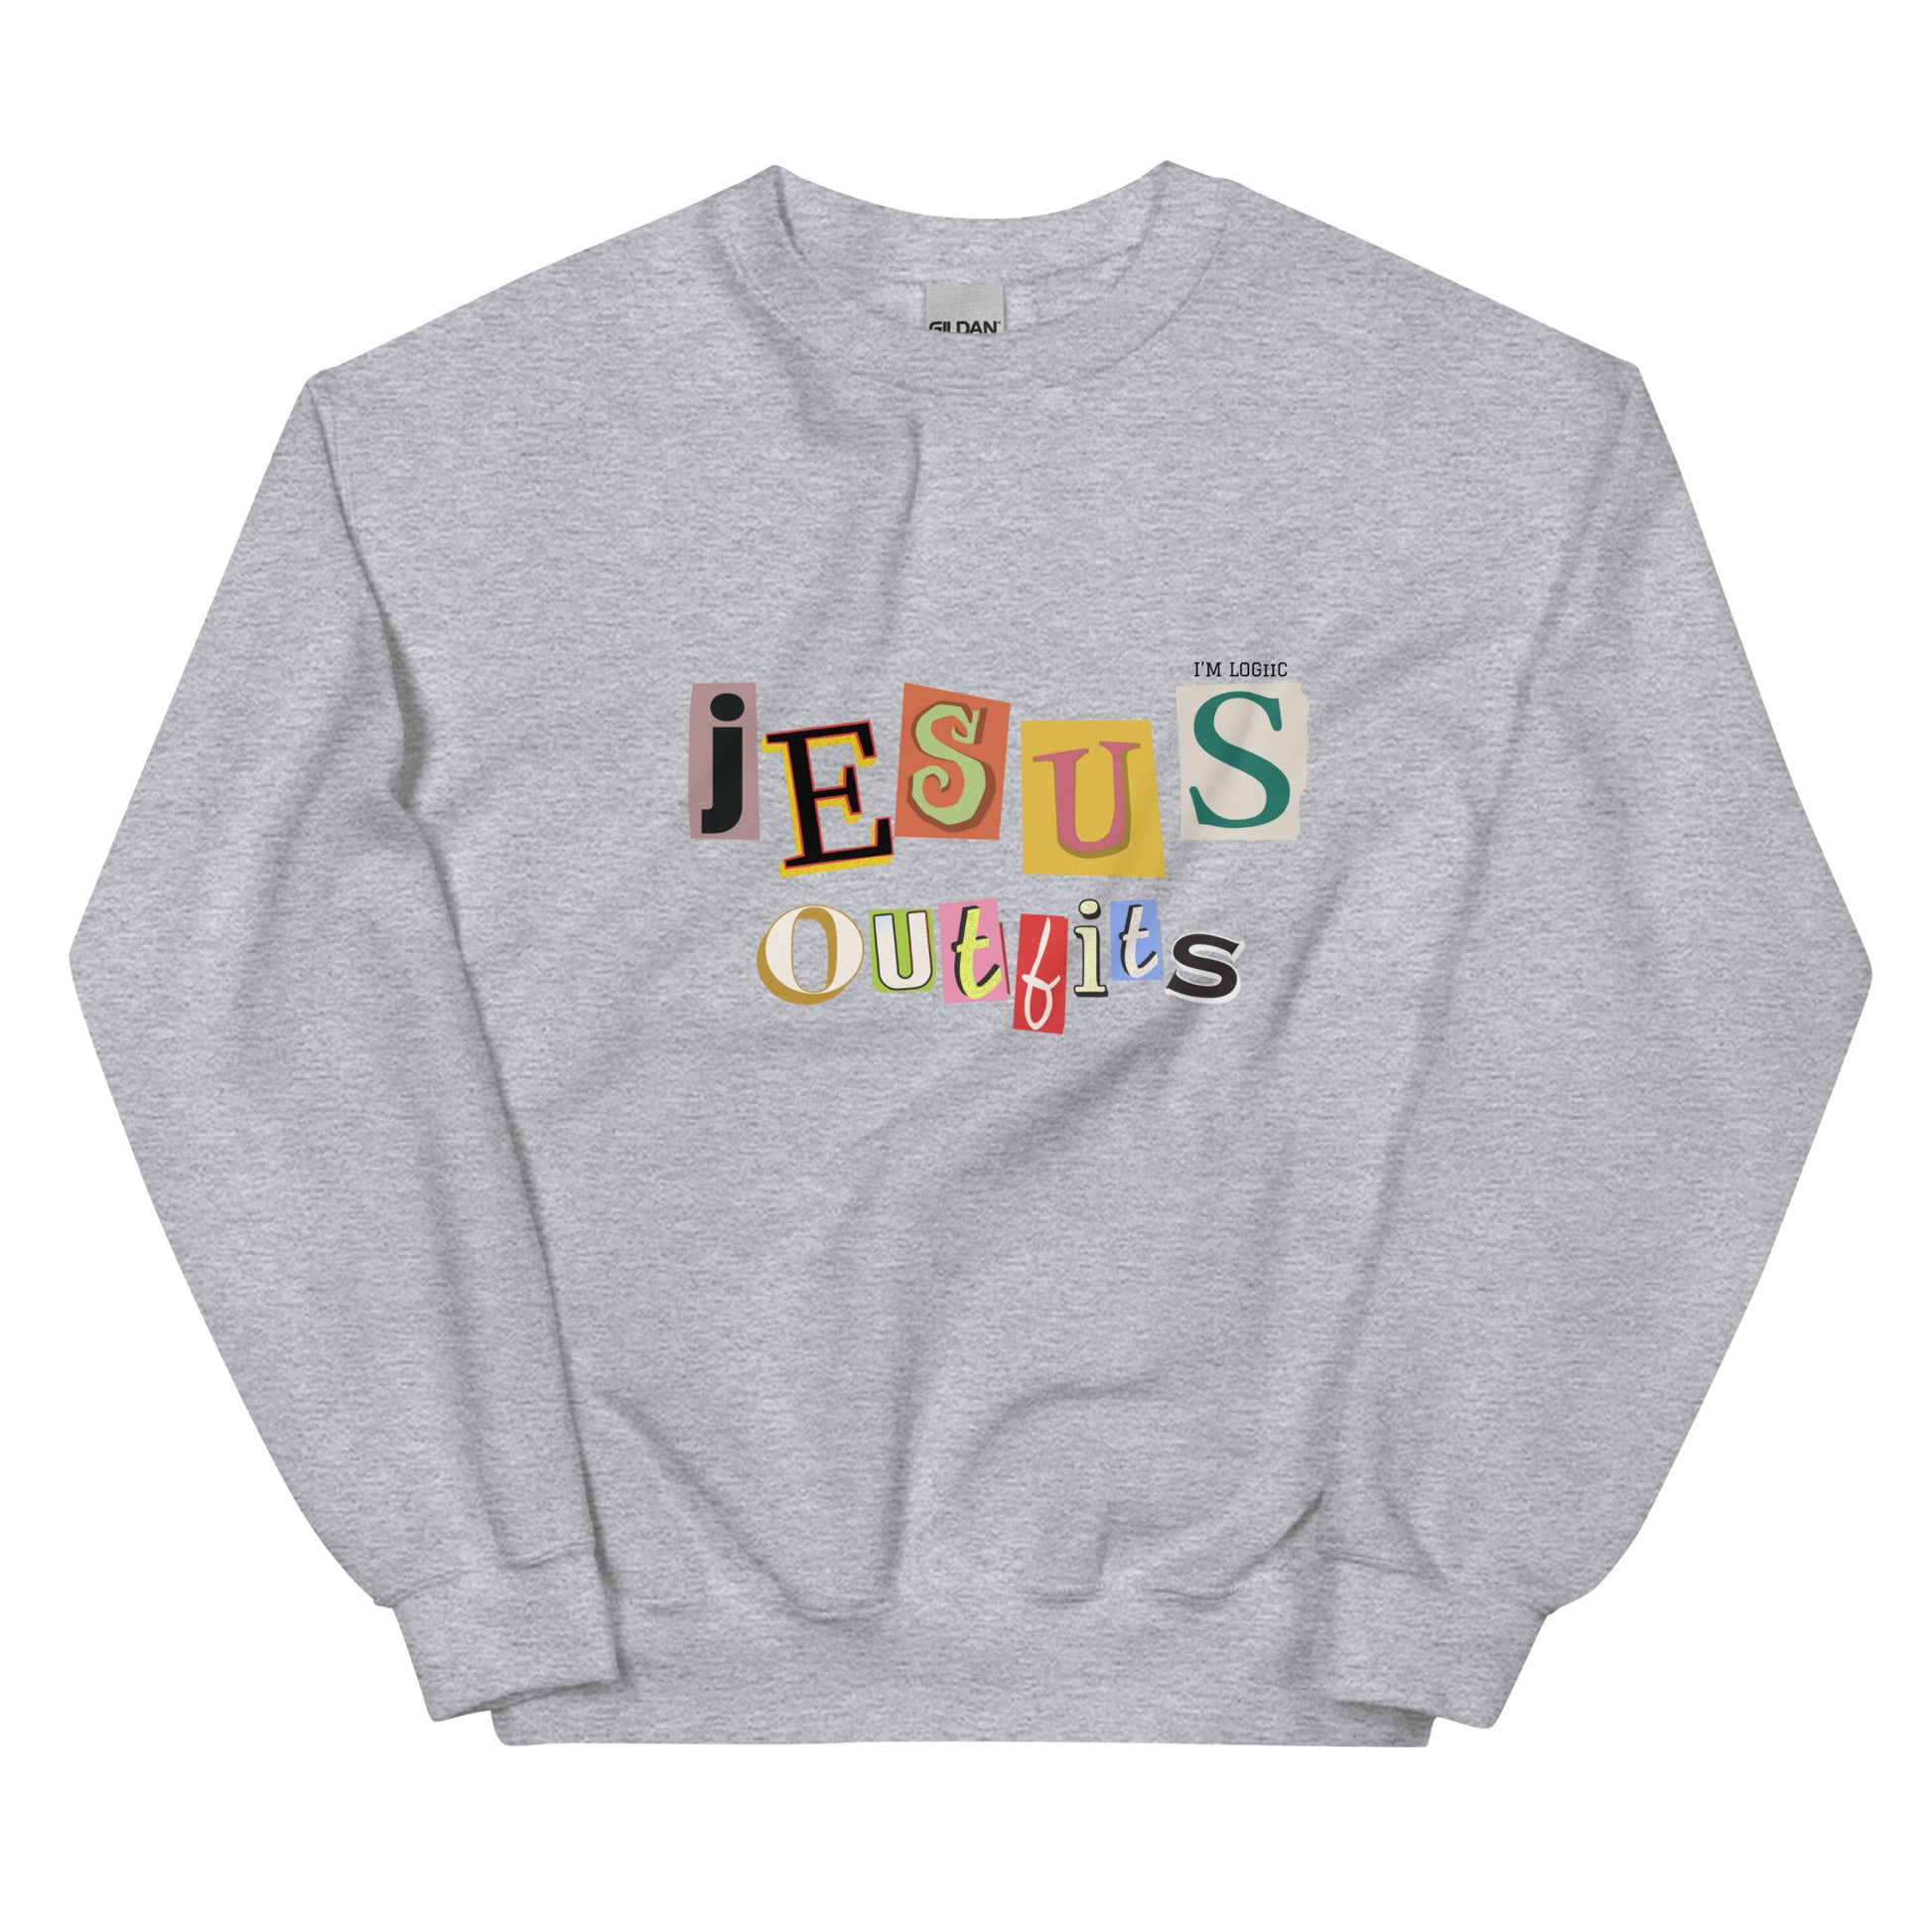 Jesus Outfits Crew Neck - Grey / S - Shirts & Tops